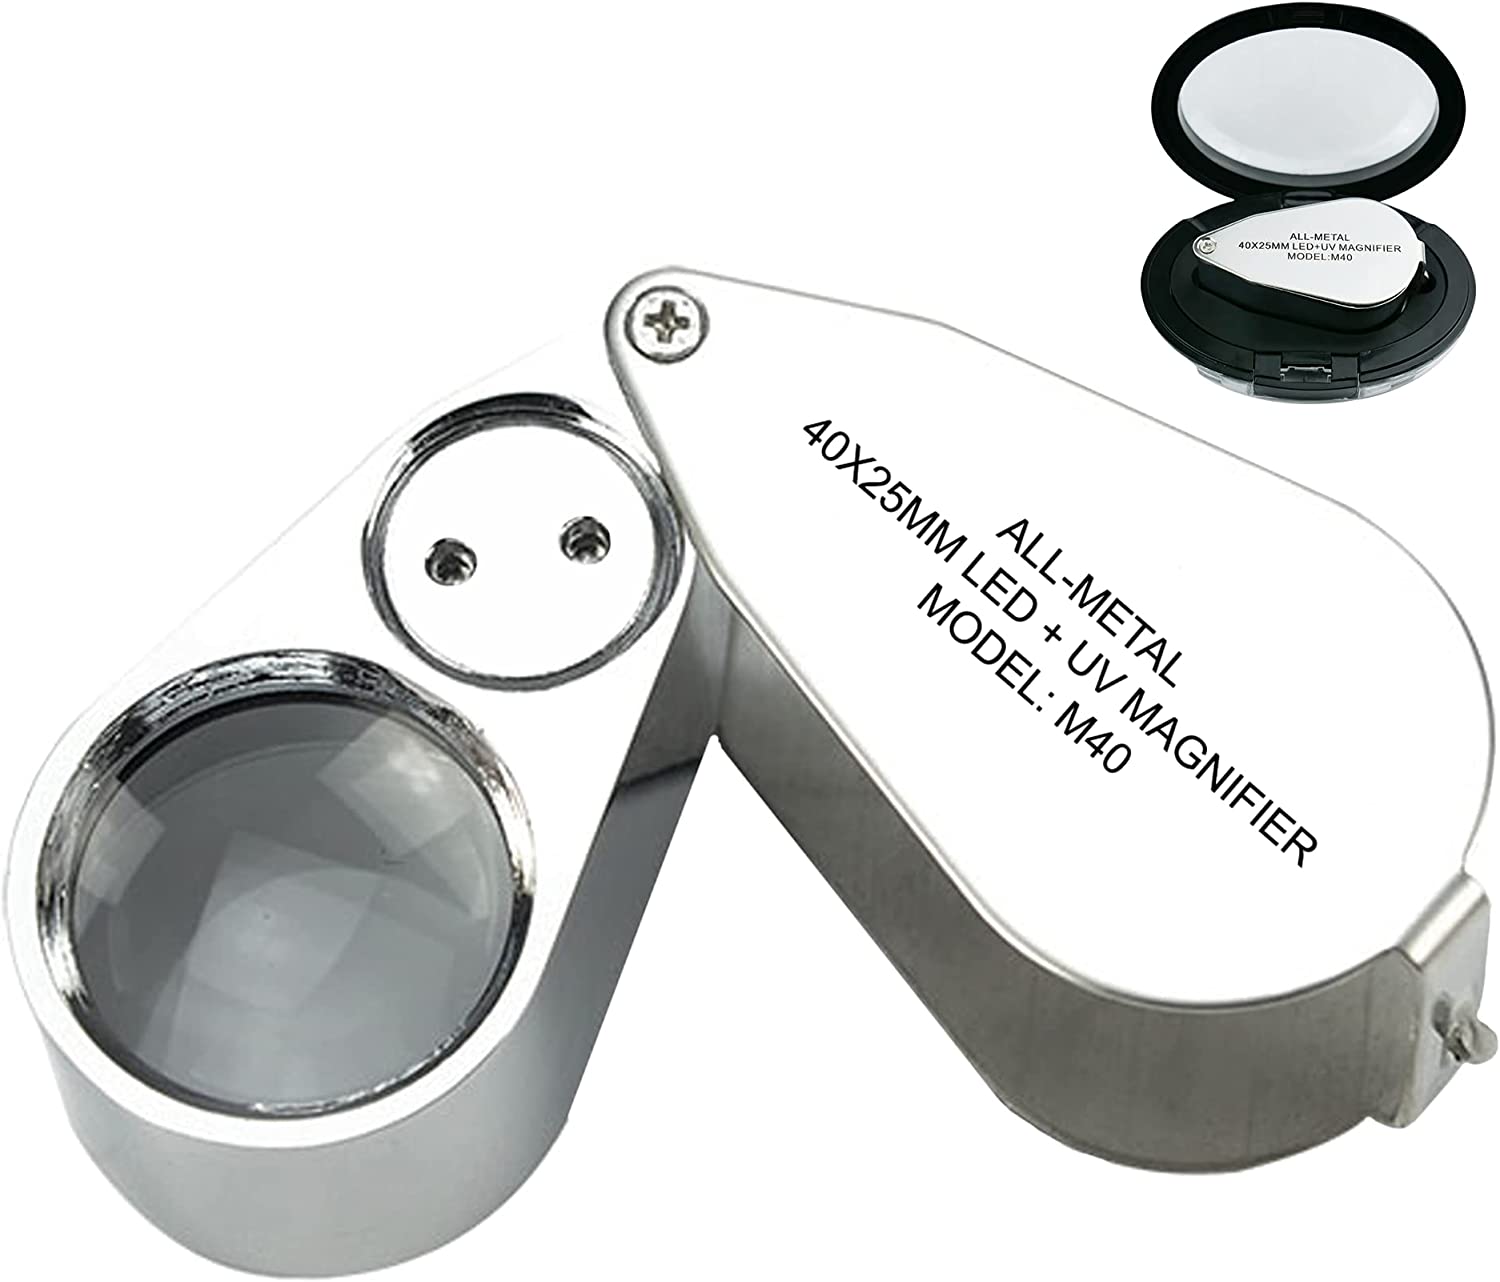 40X Jewelers Loupe with Light, UV Lighted Magnifying Glass Eye Loop, LED  Illuminated Metal Pocket Magnifier for Jewelry, Plants, Currency, Coins,  Diamonds, Stamps 